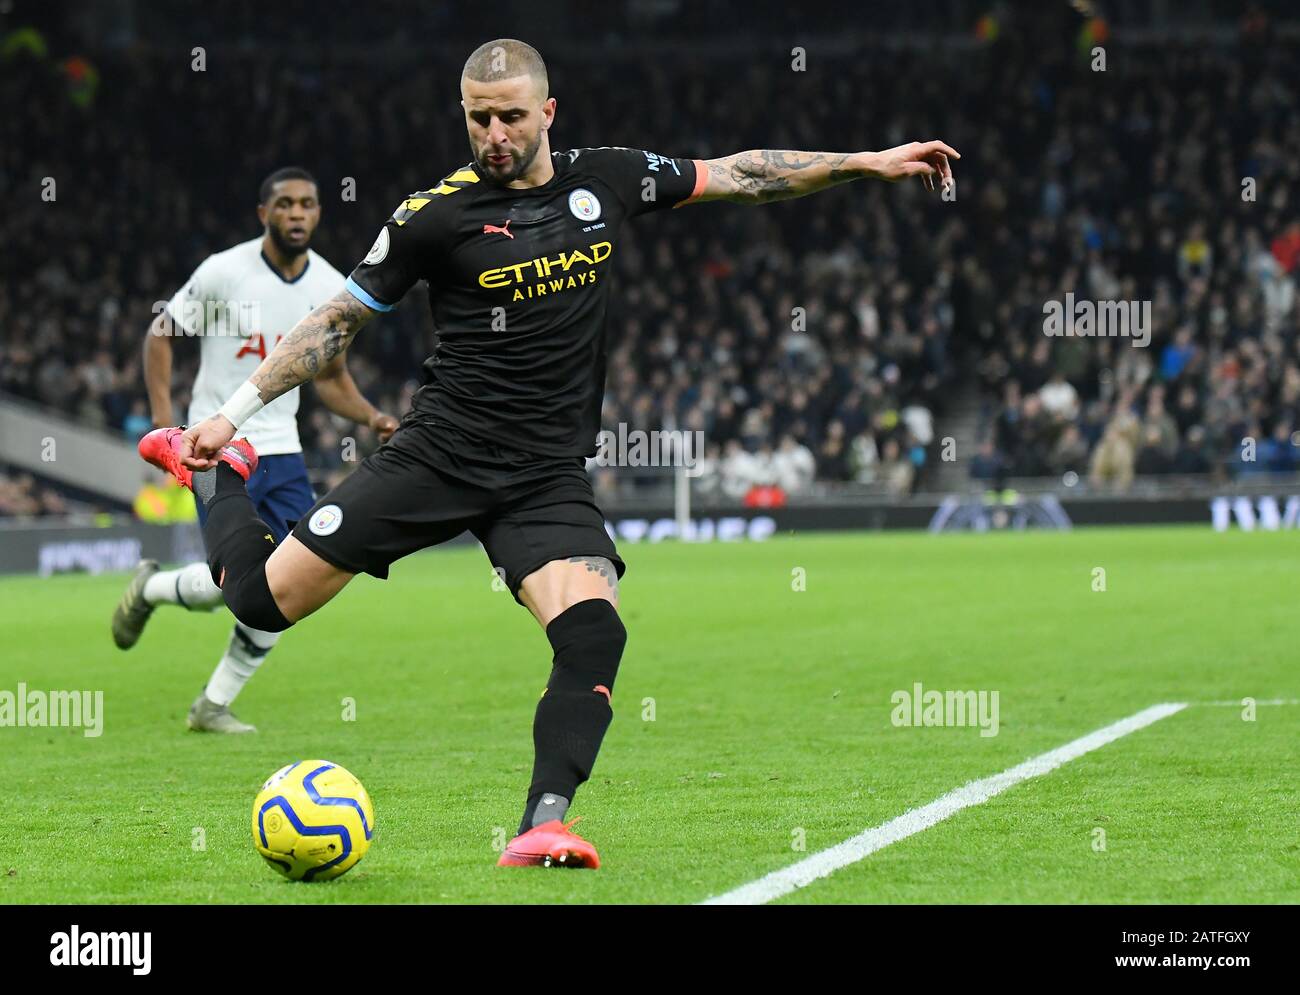 LONDON, ENGLAND - FEBRUARY 2, 2020: Kyle Walker of City pictured during the 2019/20 Premier League game between Tottenham Hotspur FC and Manchester City FC at Tottenham Hotspur Stadium. Stock Photo